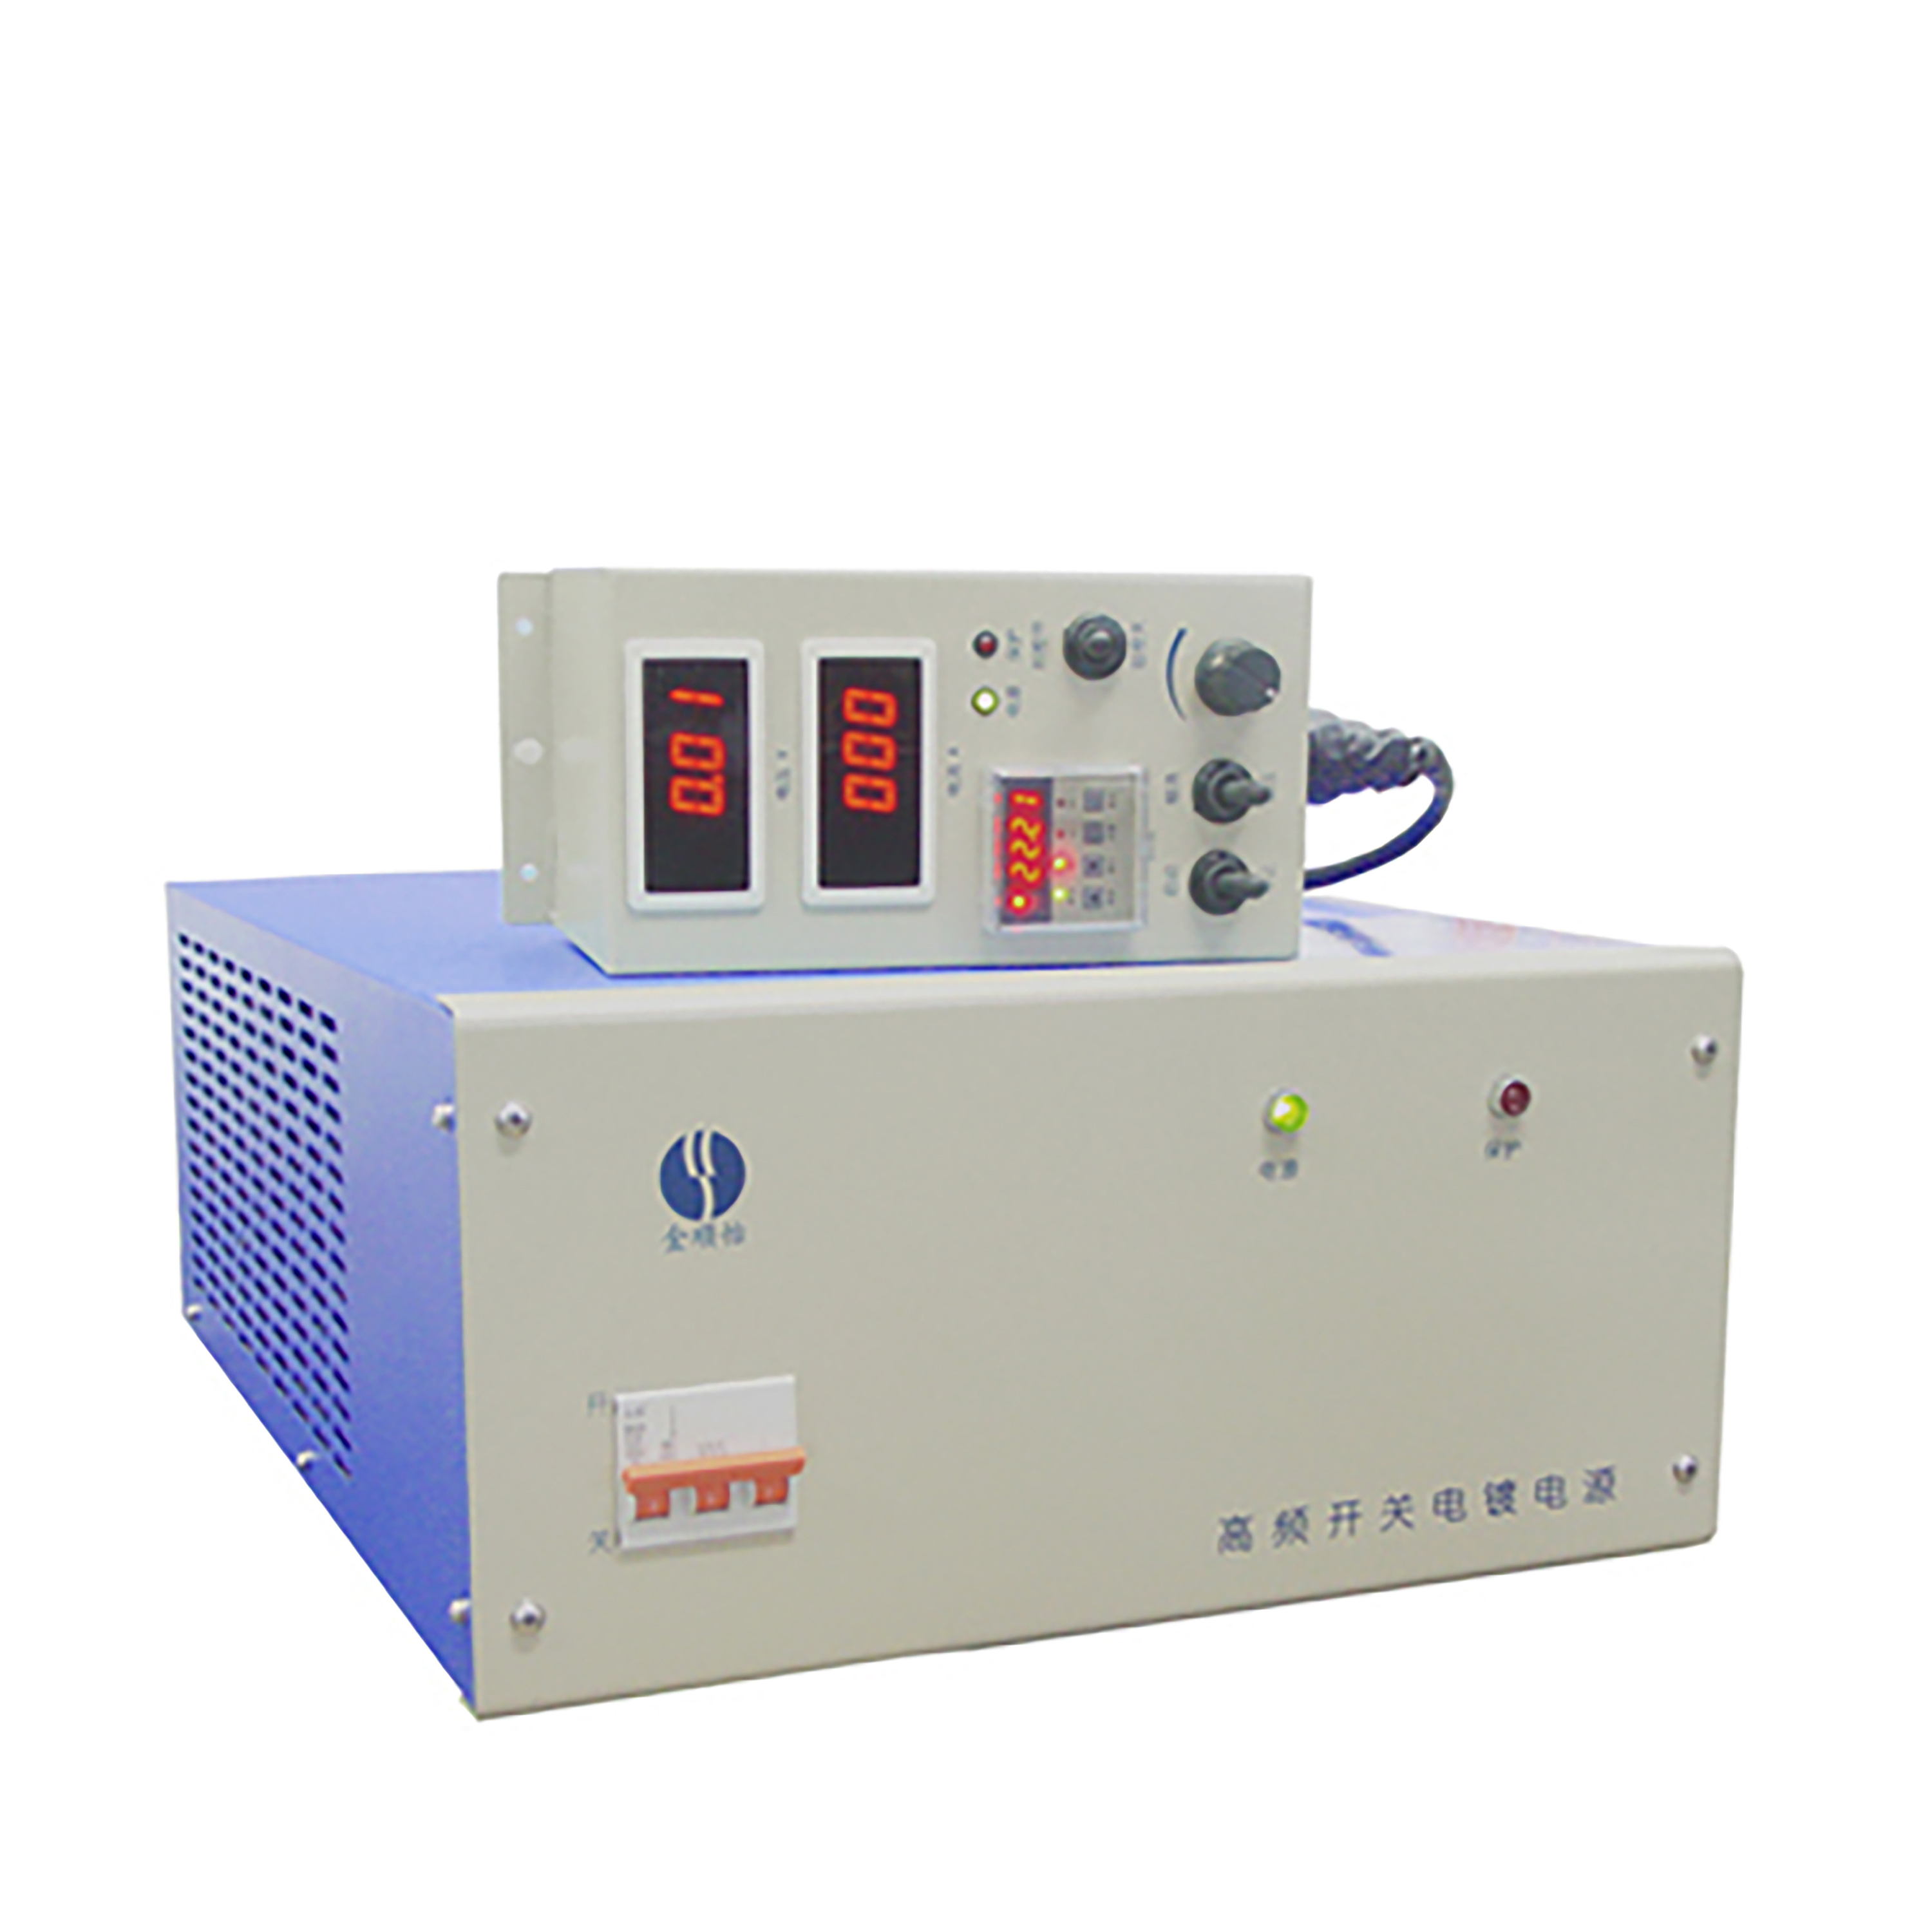  Air cooled DC rectifiers- DC POWER SUPPLY